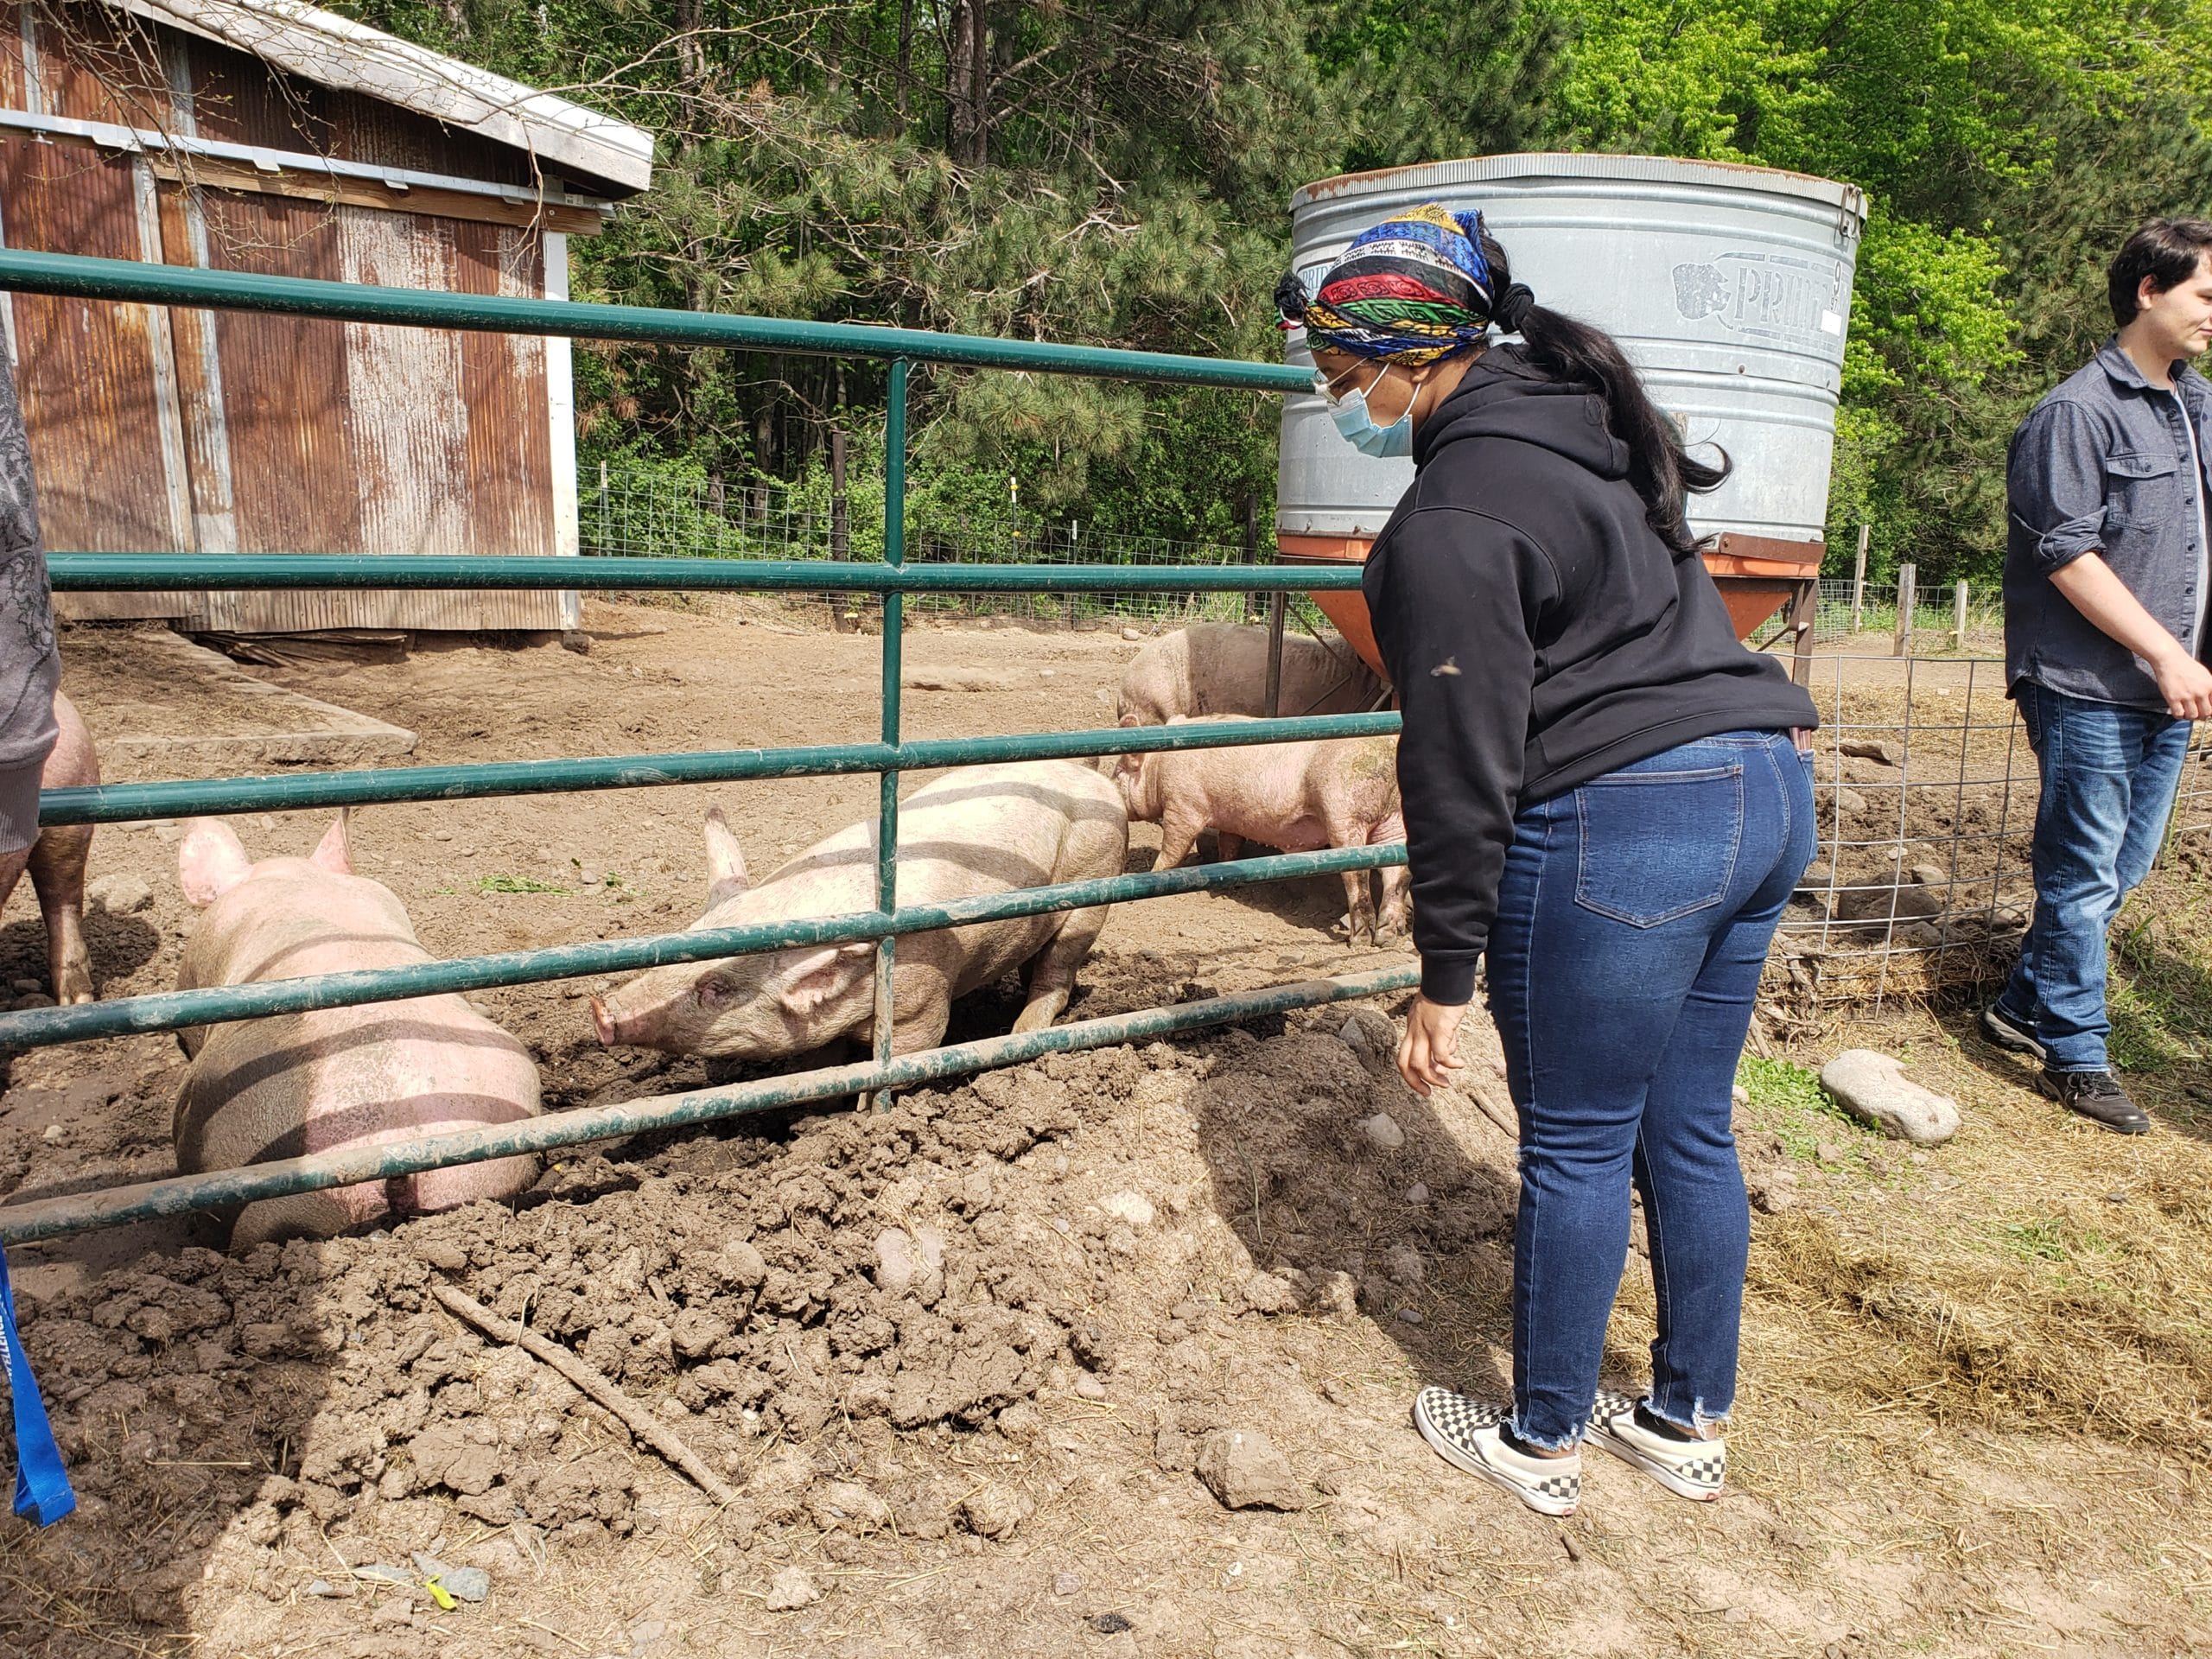 Girl looking at pigs